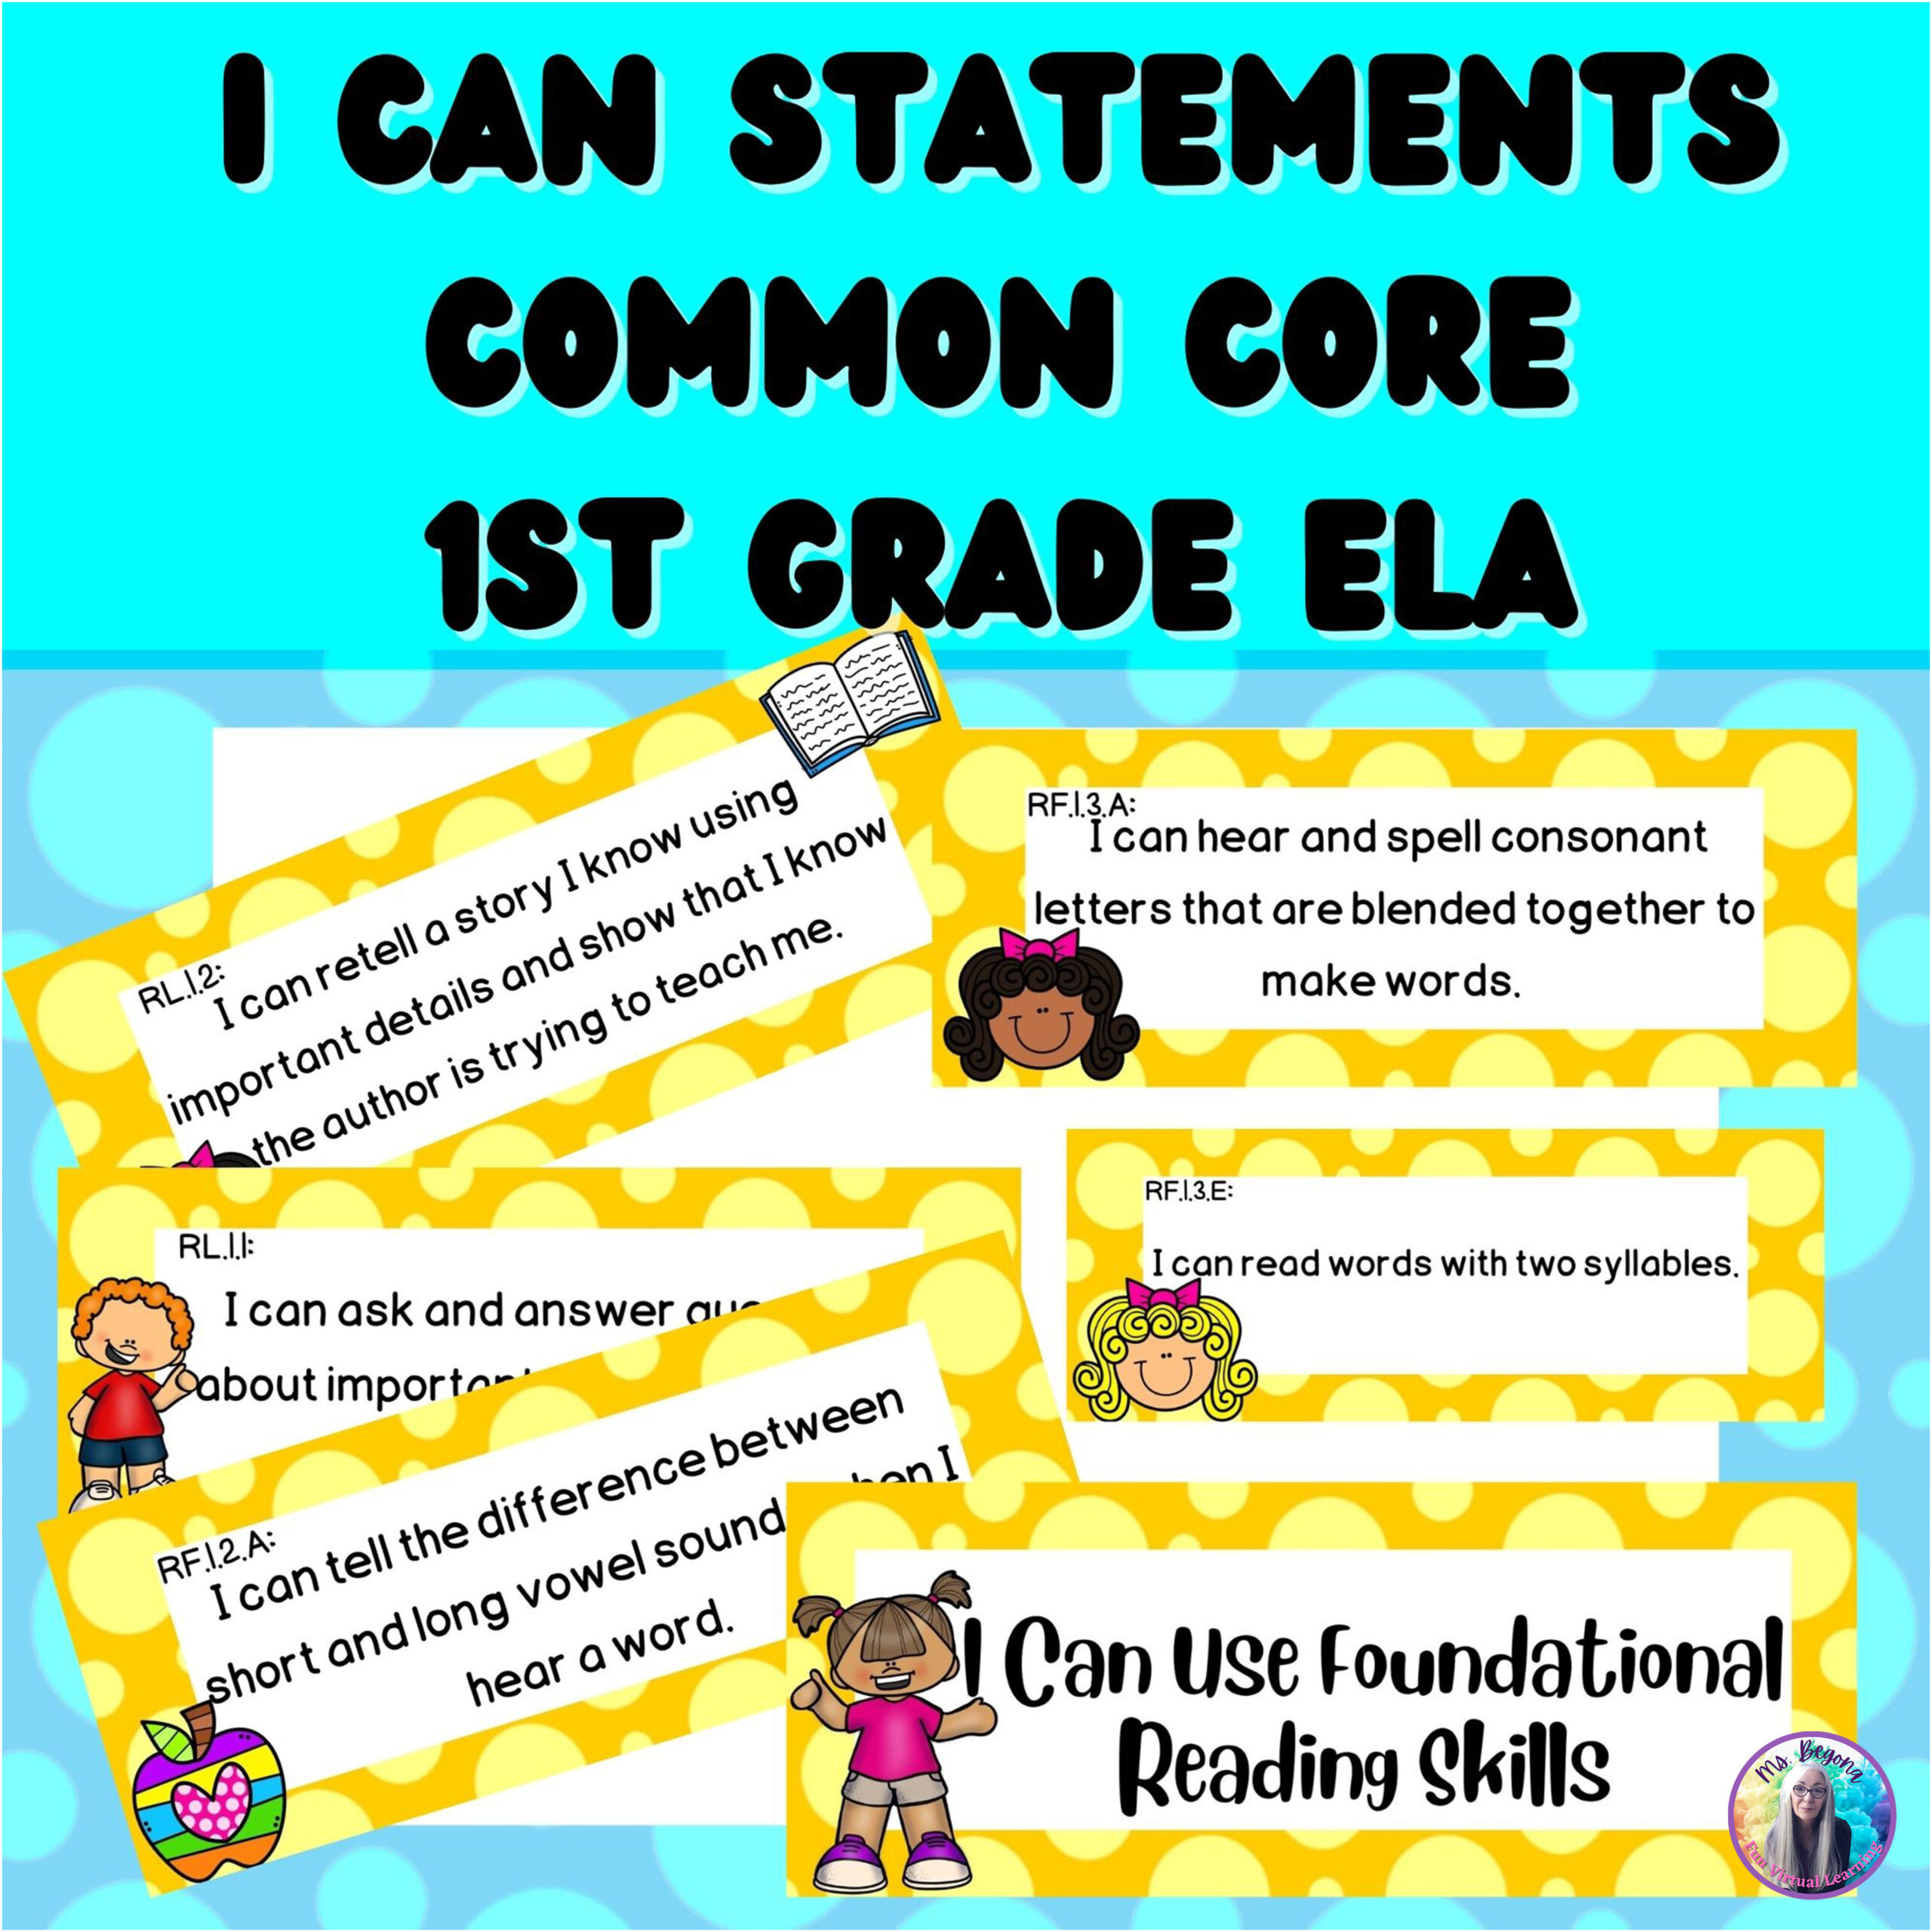 Common Core Standards I Can Statements for 1st Grade ELA